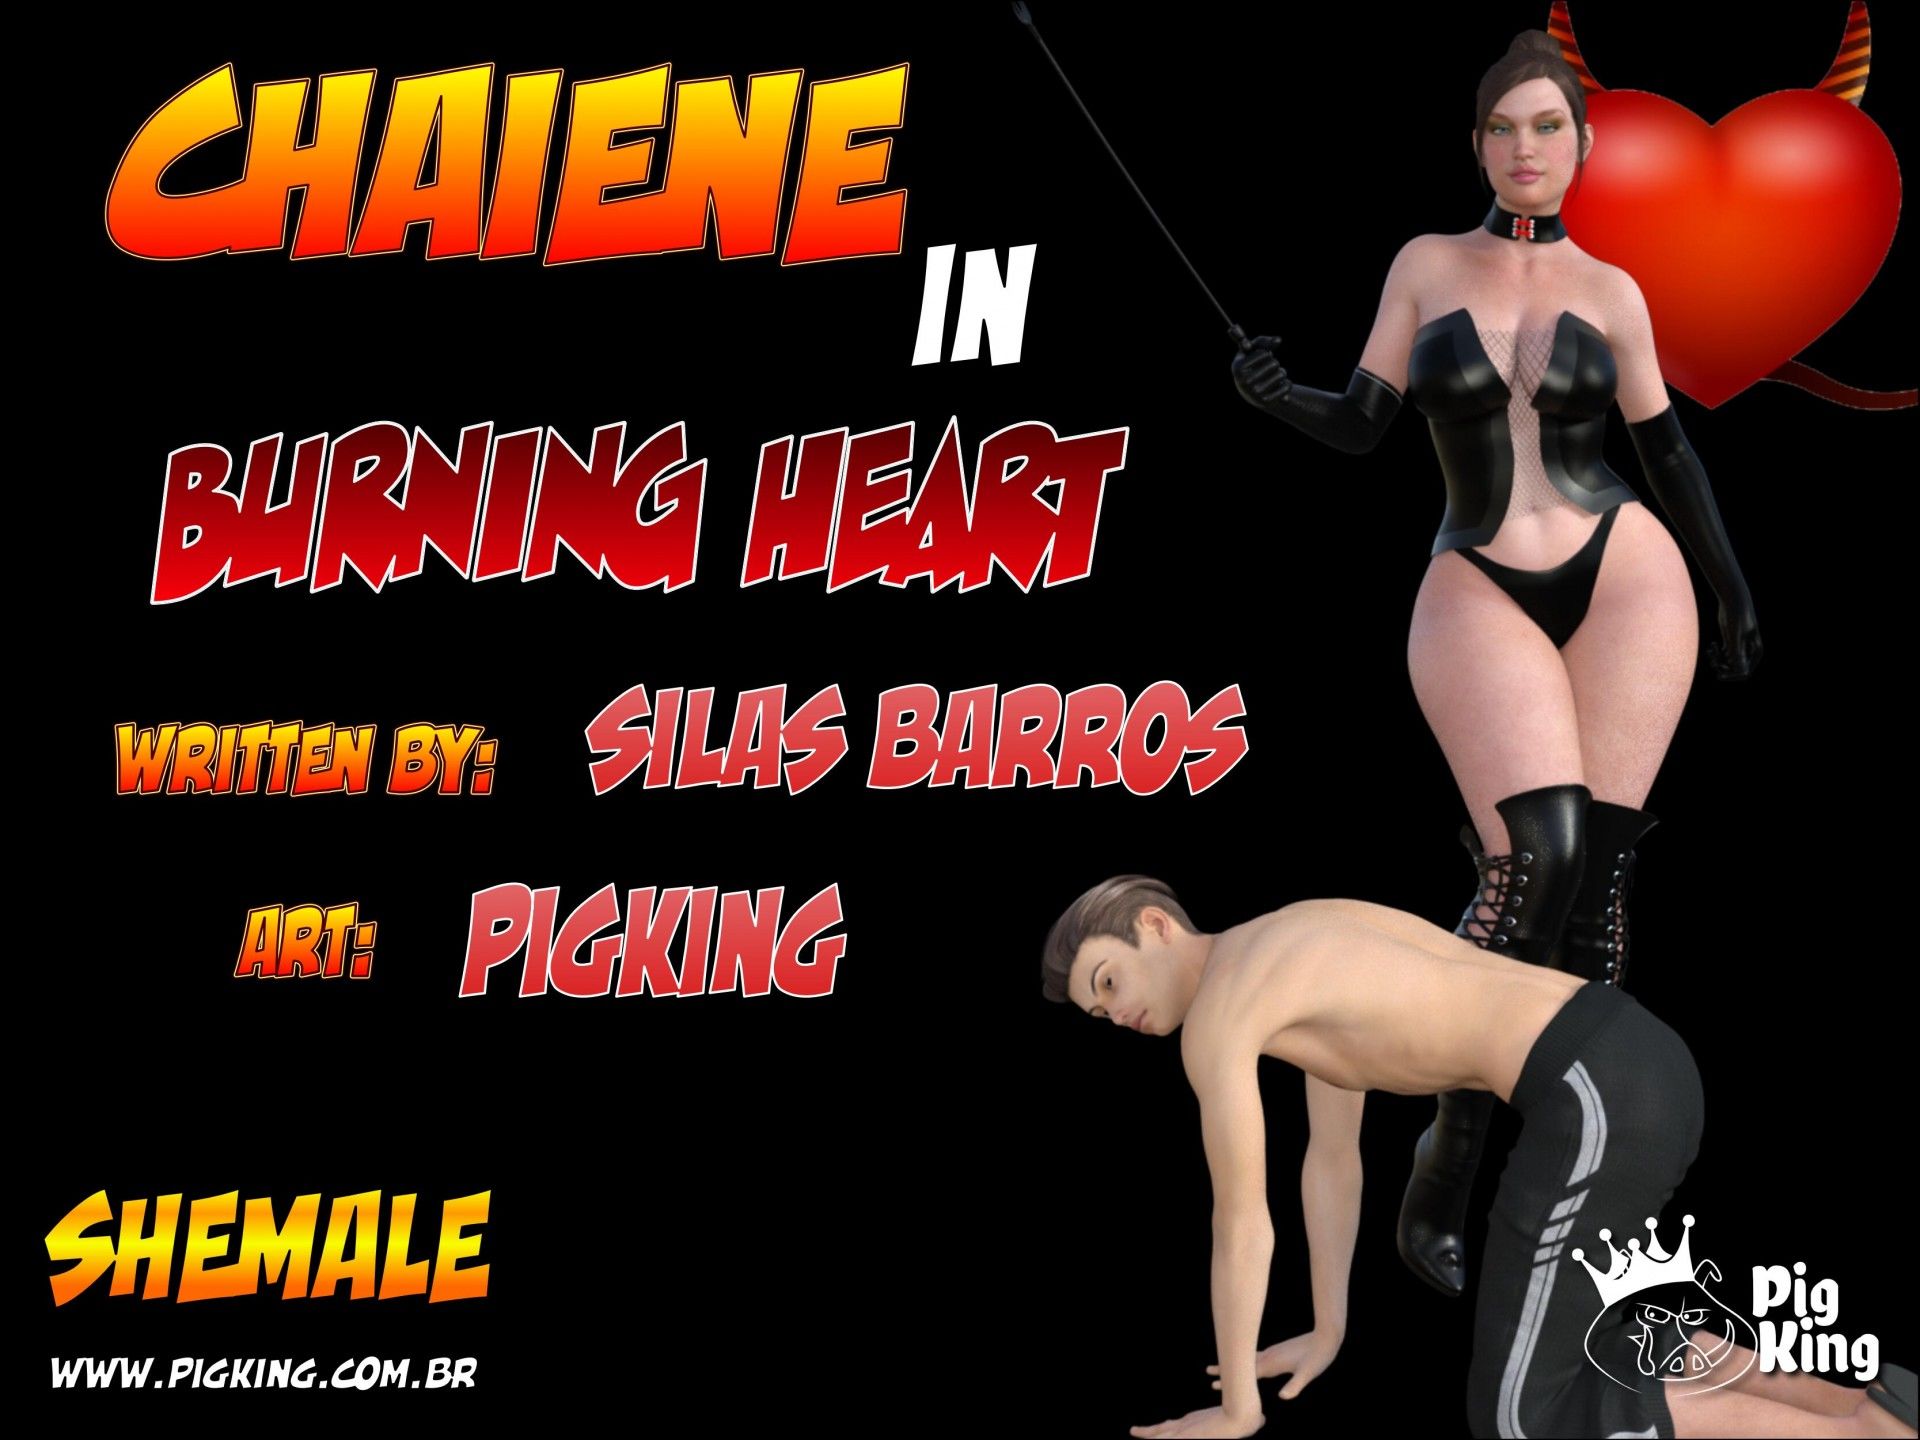 Chaiene in Burning Heart PigKing Shemale page 1